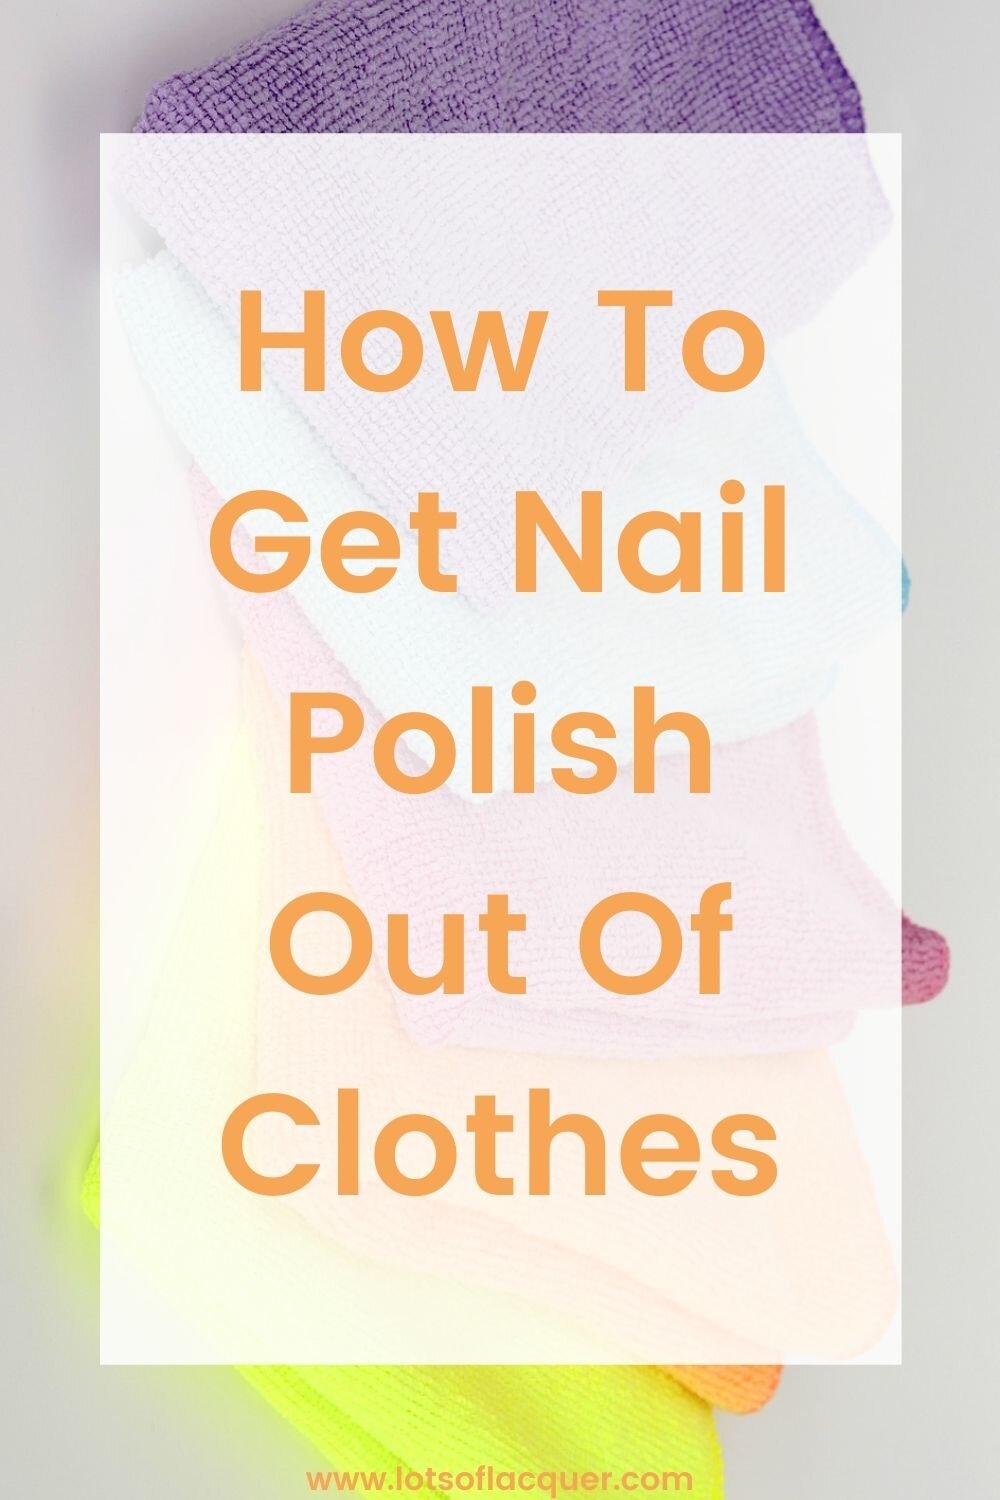 5 Easy Hacks To Remove Nail Polish, Lipstick Stains From Clothes - News18